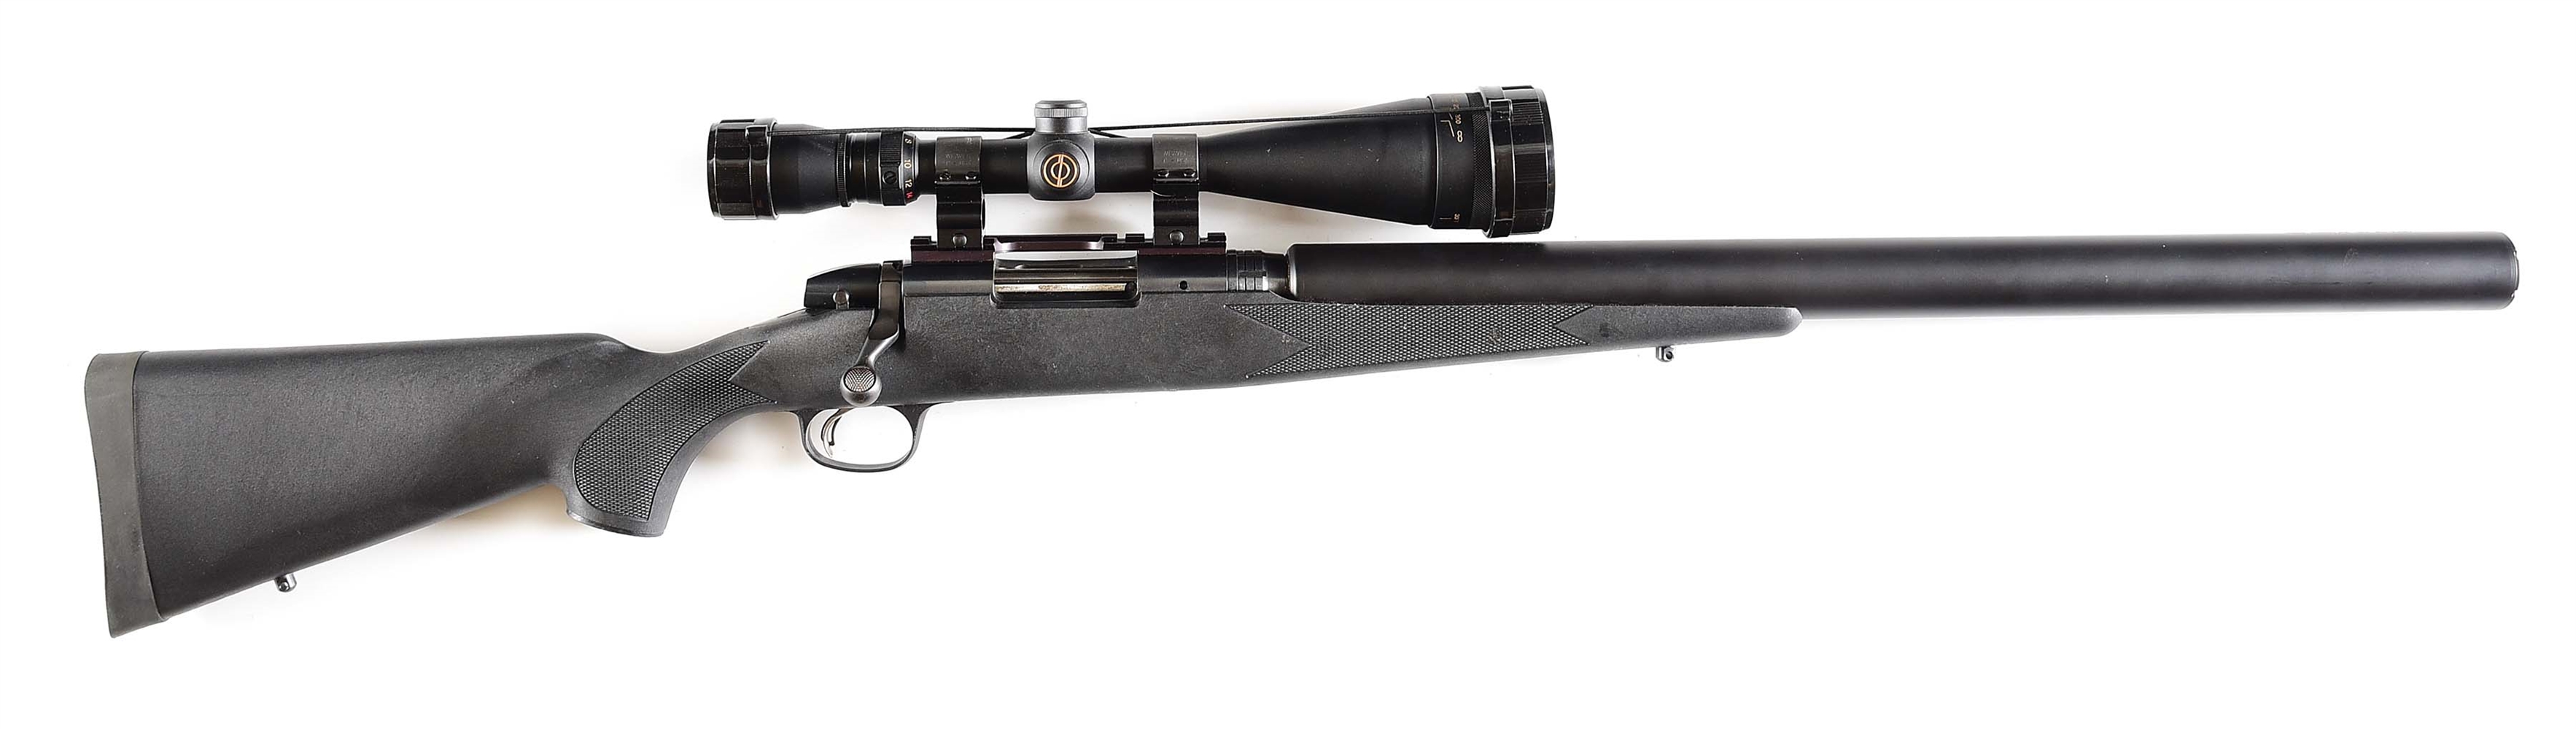 (N) MARLIN MODEL X7VH .308 WINCHESTER BOLT ACTION RIFLE WITH INTEGRAL SRT ARMS SILENCER (SILENCER).